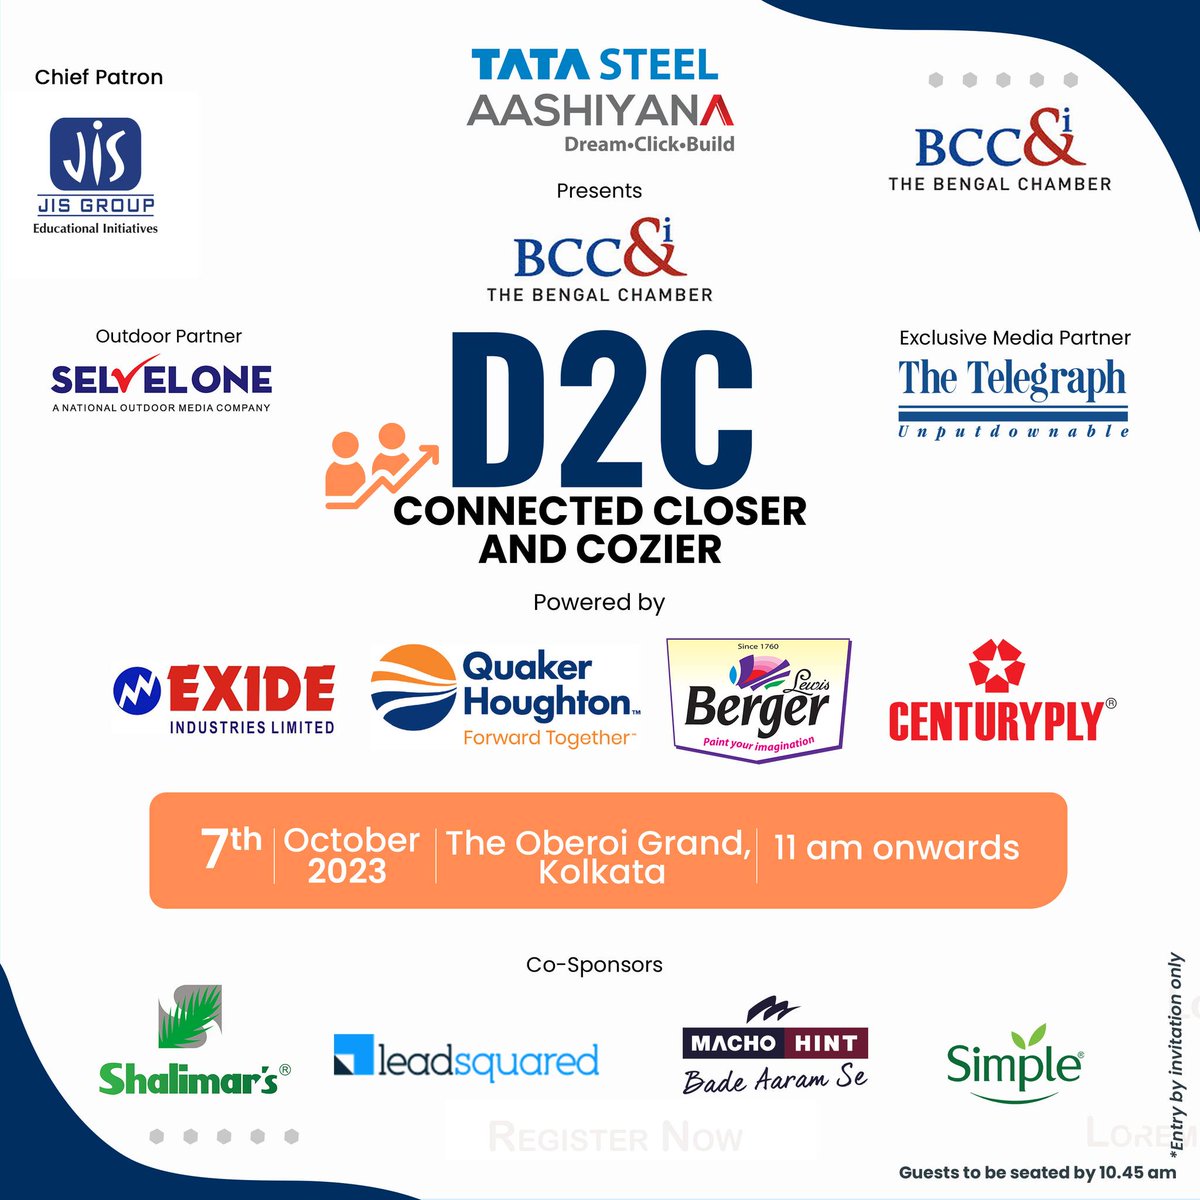 The Marketing Conclave - D2C Connected Closer at The Oberoi Grand, Kolkata on 7th November 2023
.
.
.
#d2cindia #d2cbrands #d2cmarketing  #bengalchamber    #bcc&i #bcciofficial #digitalhashtag  #bigbilliondays2023 #GreatIndianFestival #Amazon #Telegraph #LeadSquared #D2C